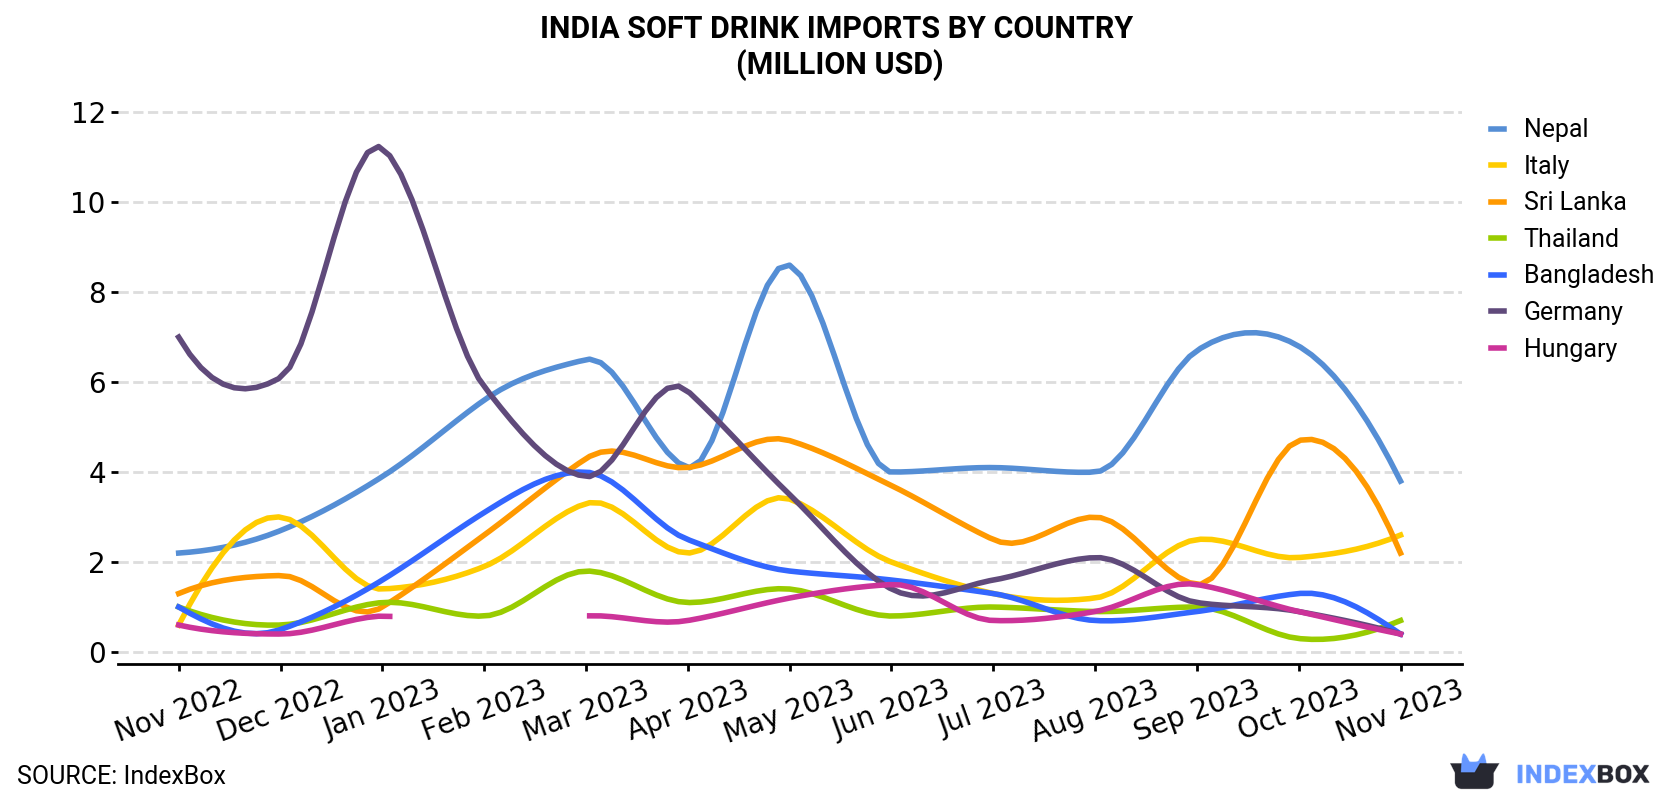 India Soft Drink Imports By Country (Million USD)